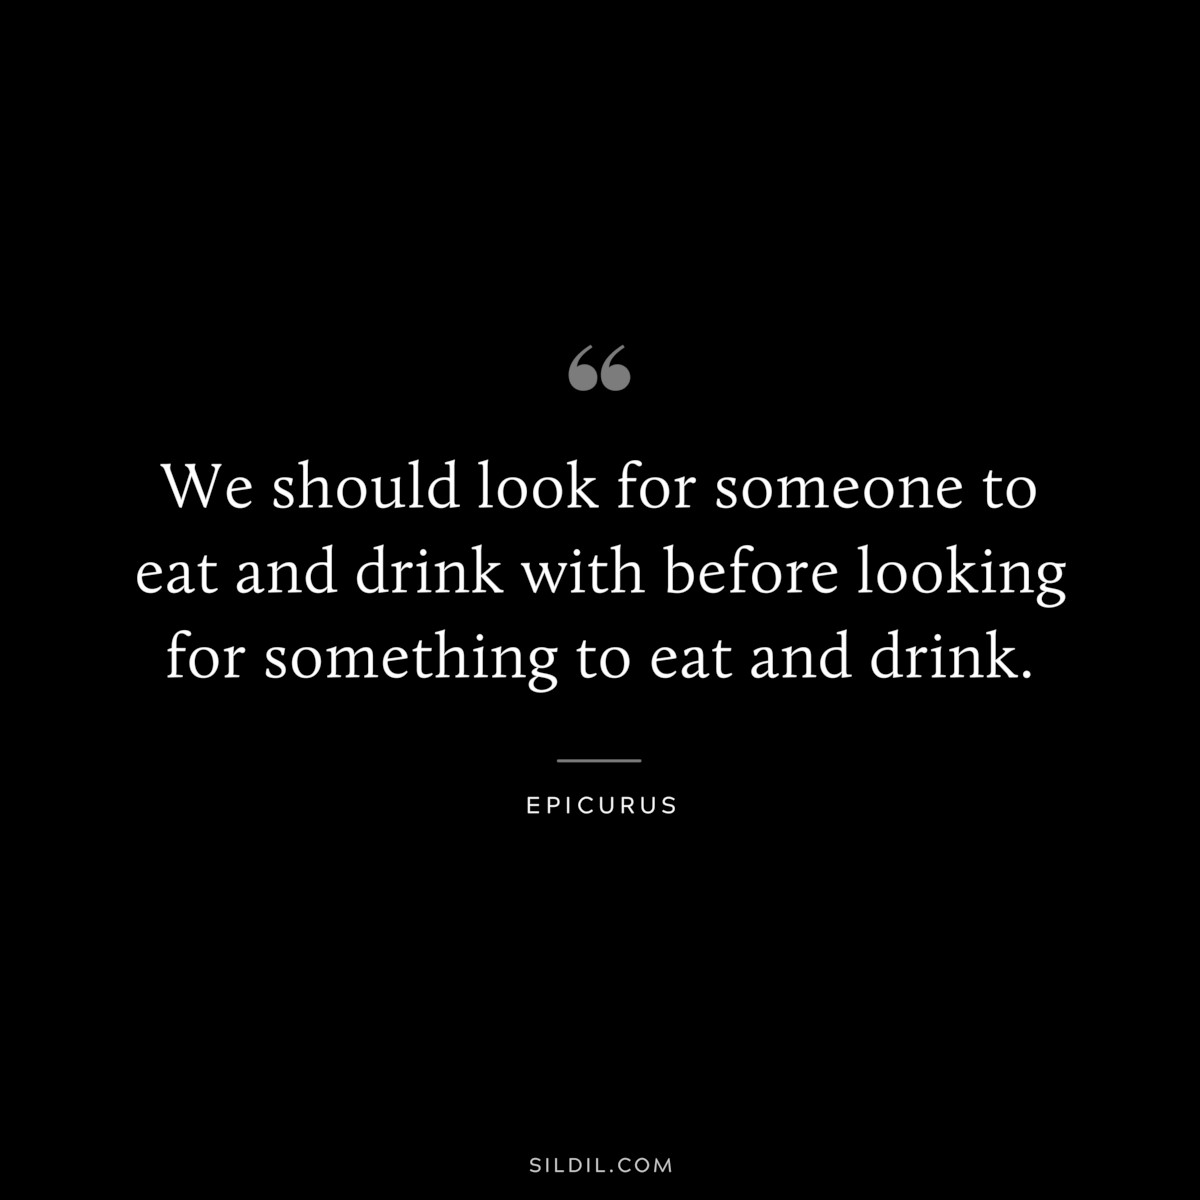 We should look for someone to eat and drink with before looking for something to eat and drink. — Epicurus